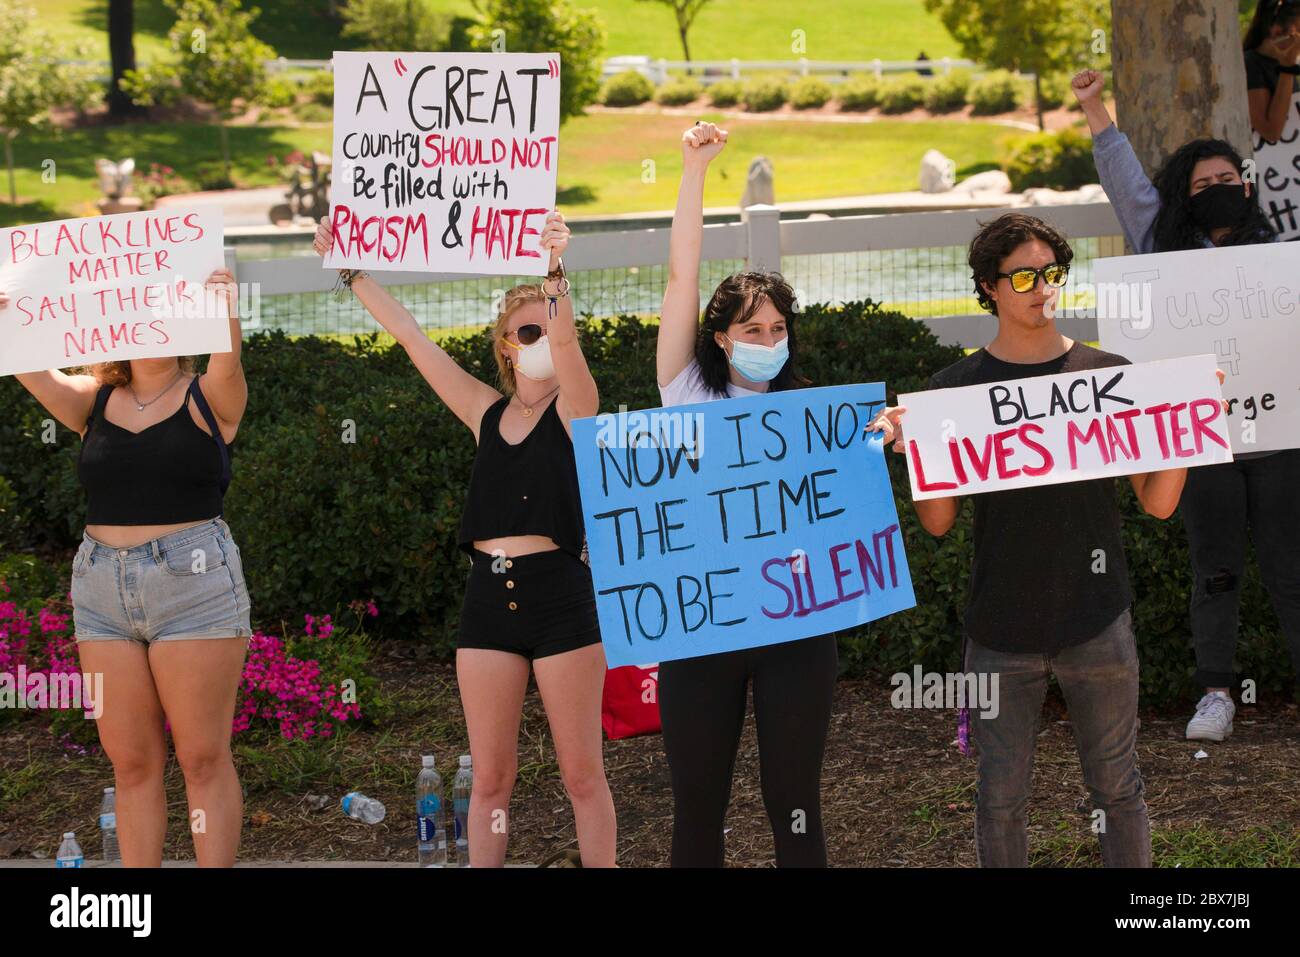 Protesors at a corner in Temecula, California, USA on June 3, 2020 to call for justice for George Floyd and all black lives lost to police brutality. Stock Photo